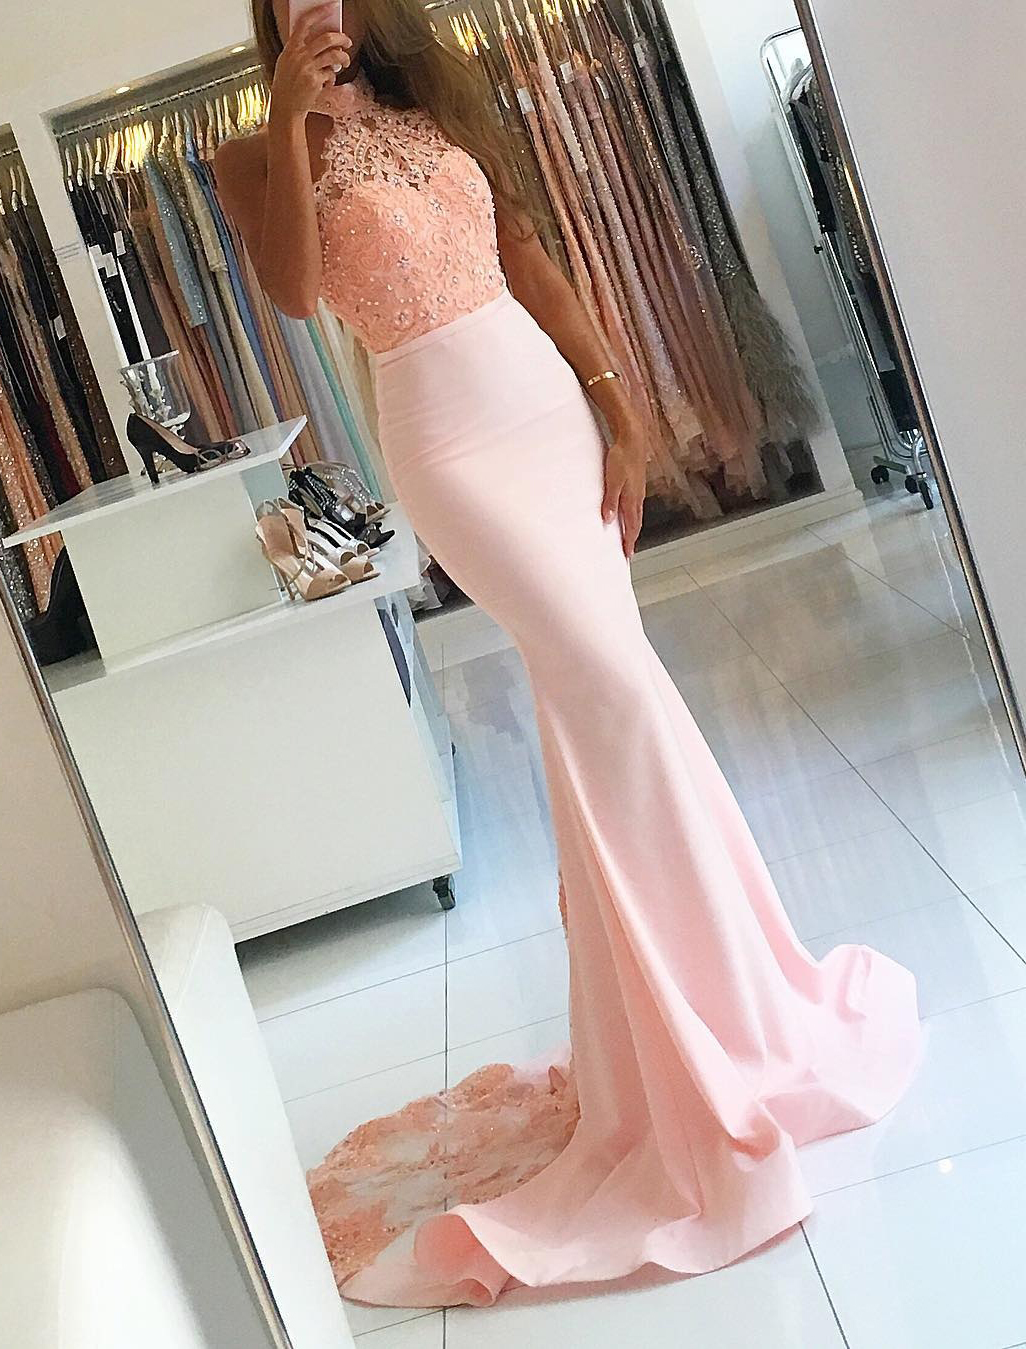 Mermaid Prom Dresses With Lace Appliques,long Prom Dress With Train Back,elegant Formal Dress With Beading,sexy Backless Prom Dress,sleeveless